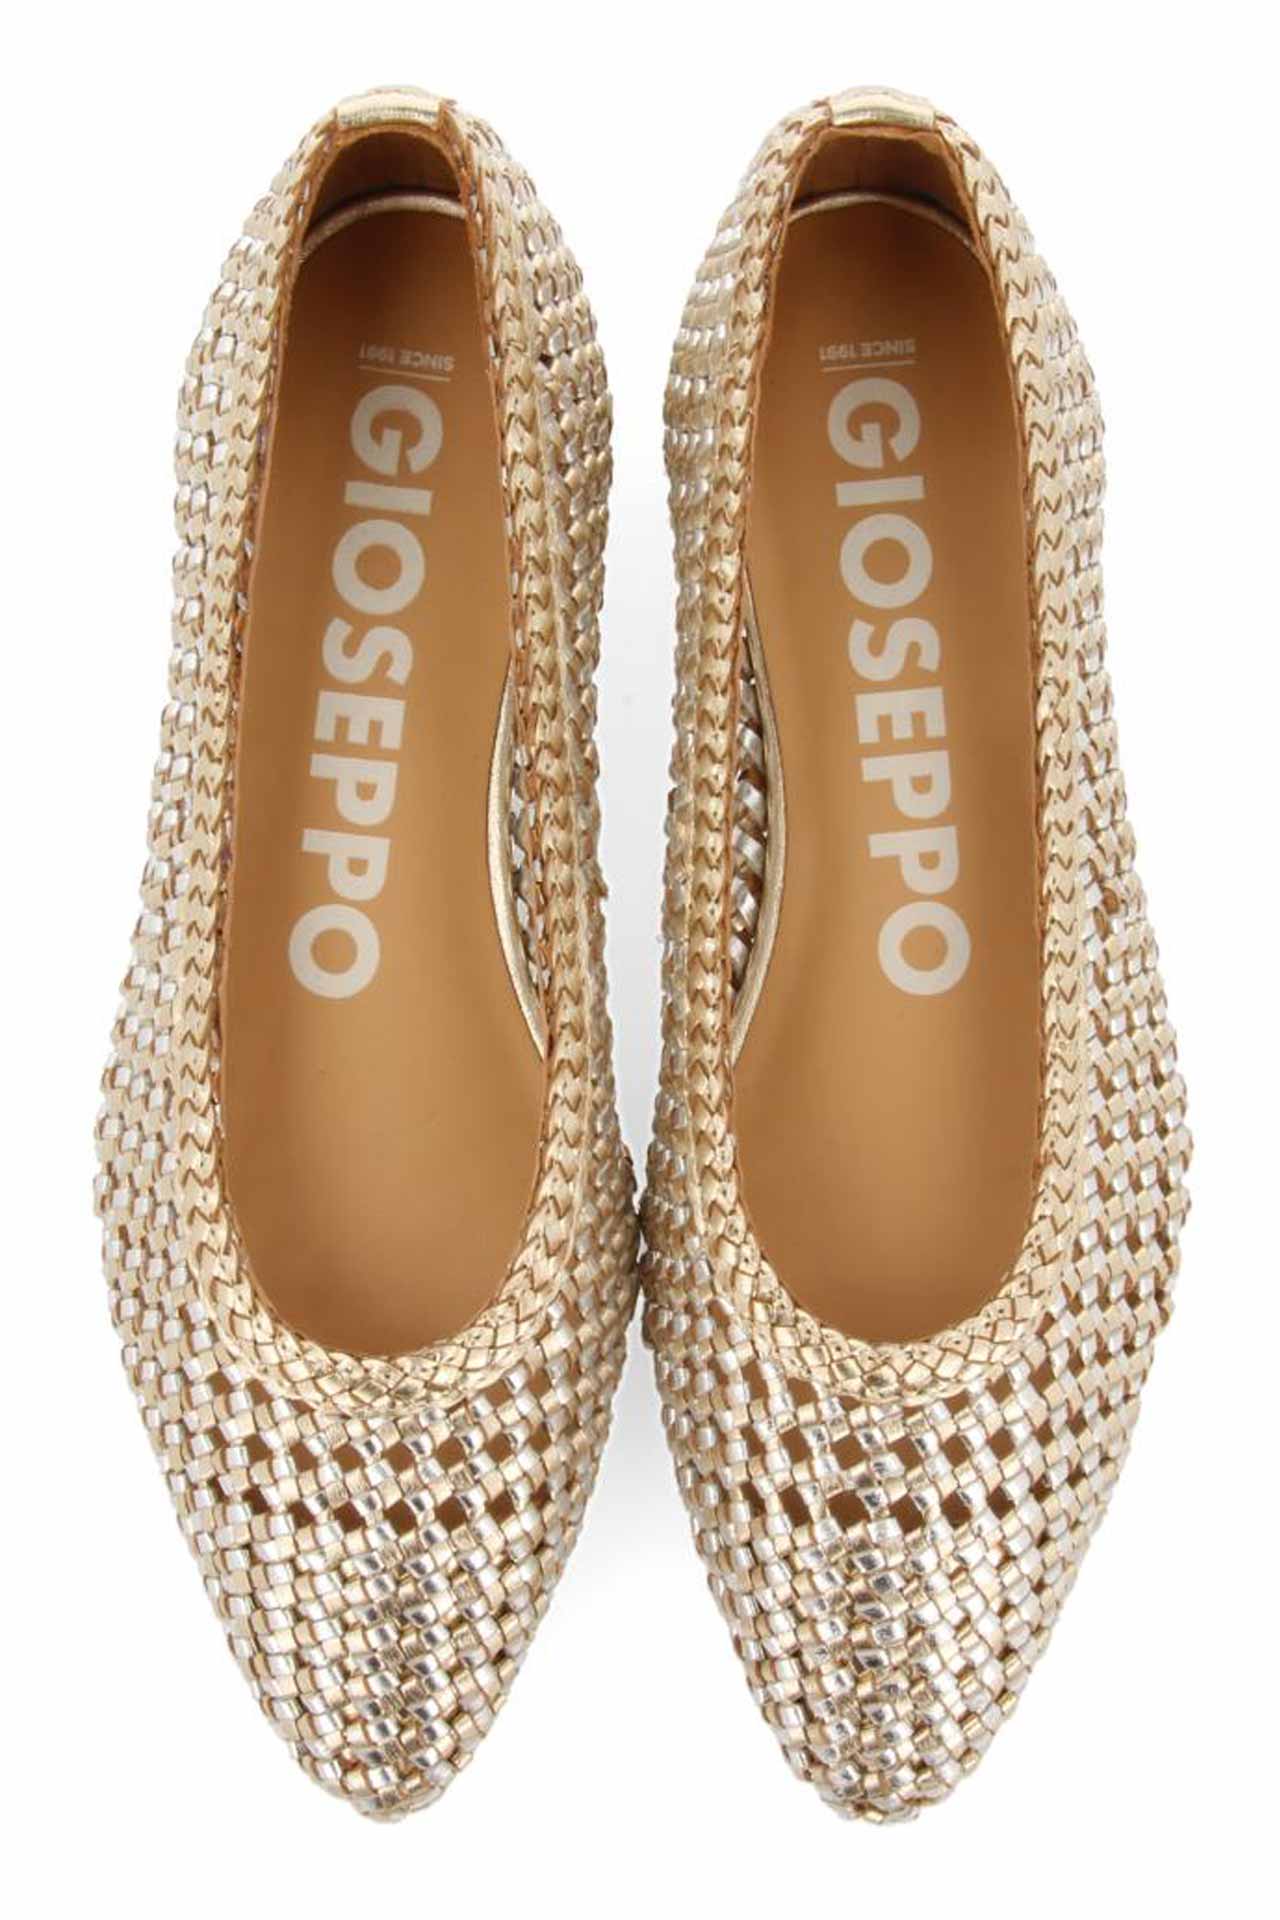 GIOSEPPO ATHERTON METALLIC BRAIDED LEATHER BALLET FLATS WITH POINTED TOE